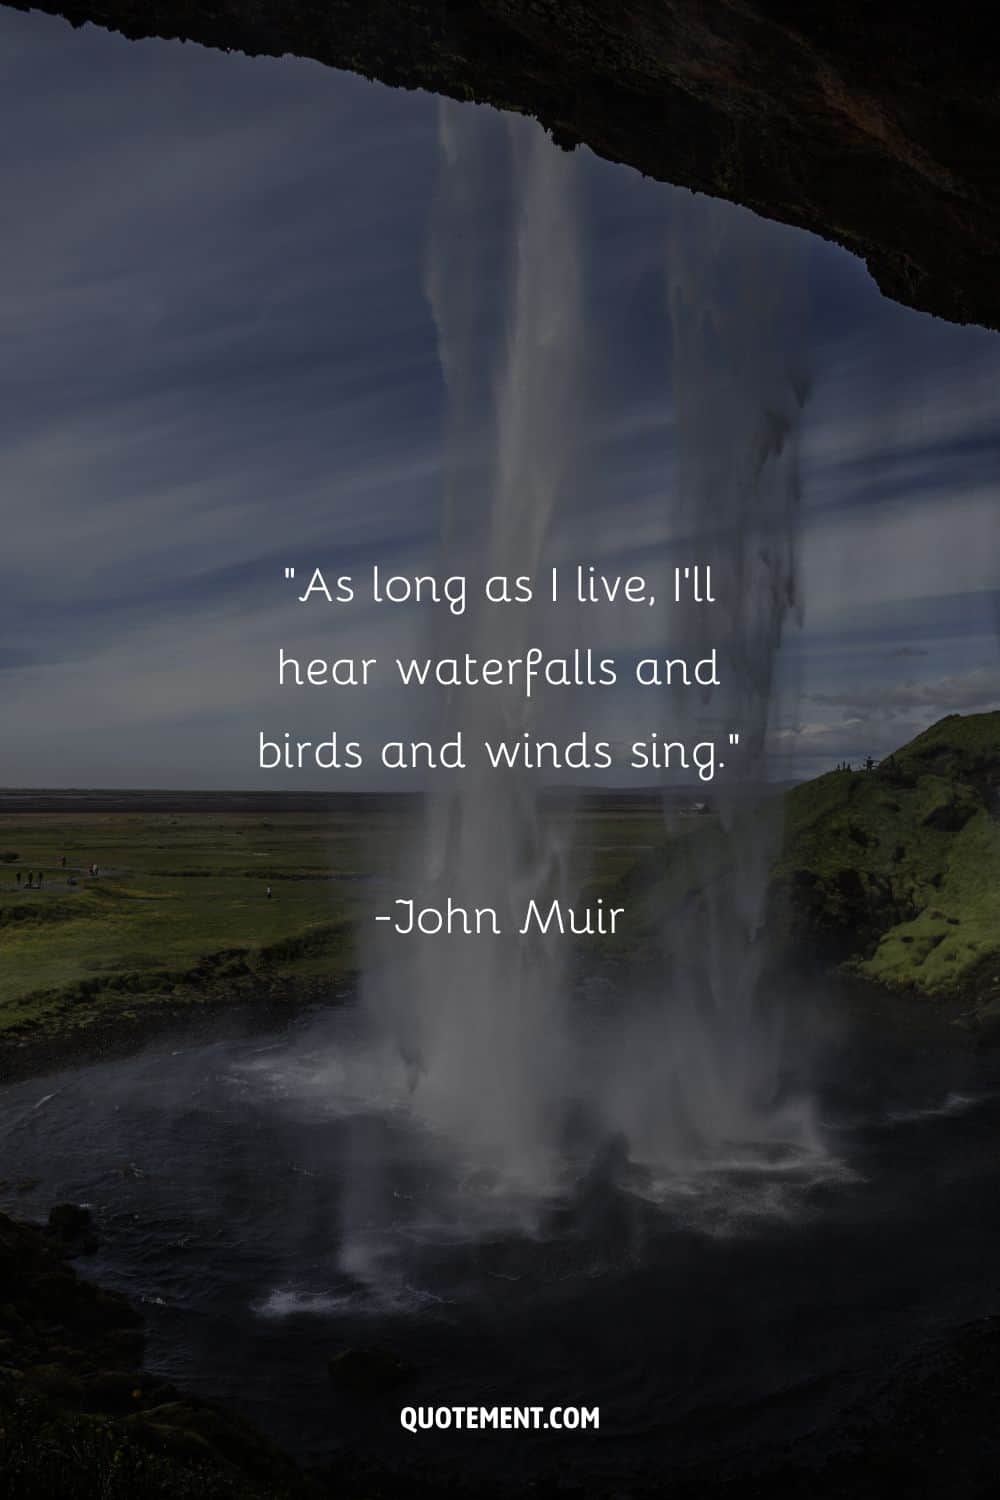 Inspirational quote by John Muir and a waterfall in the background
